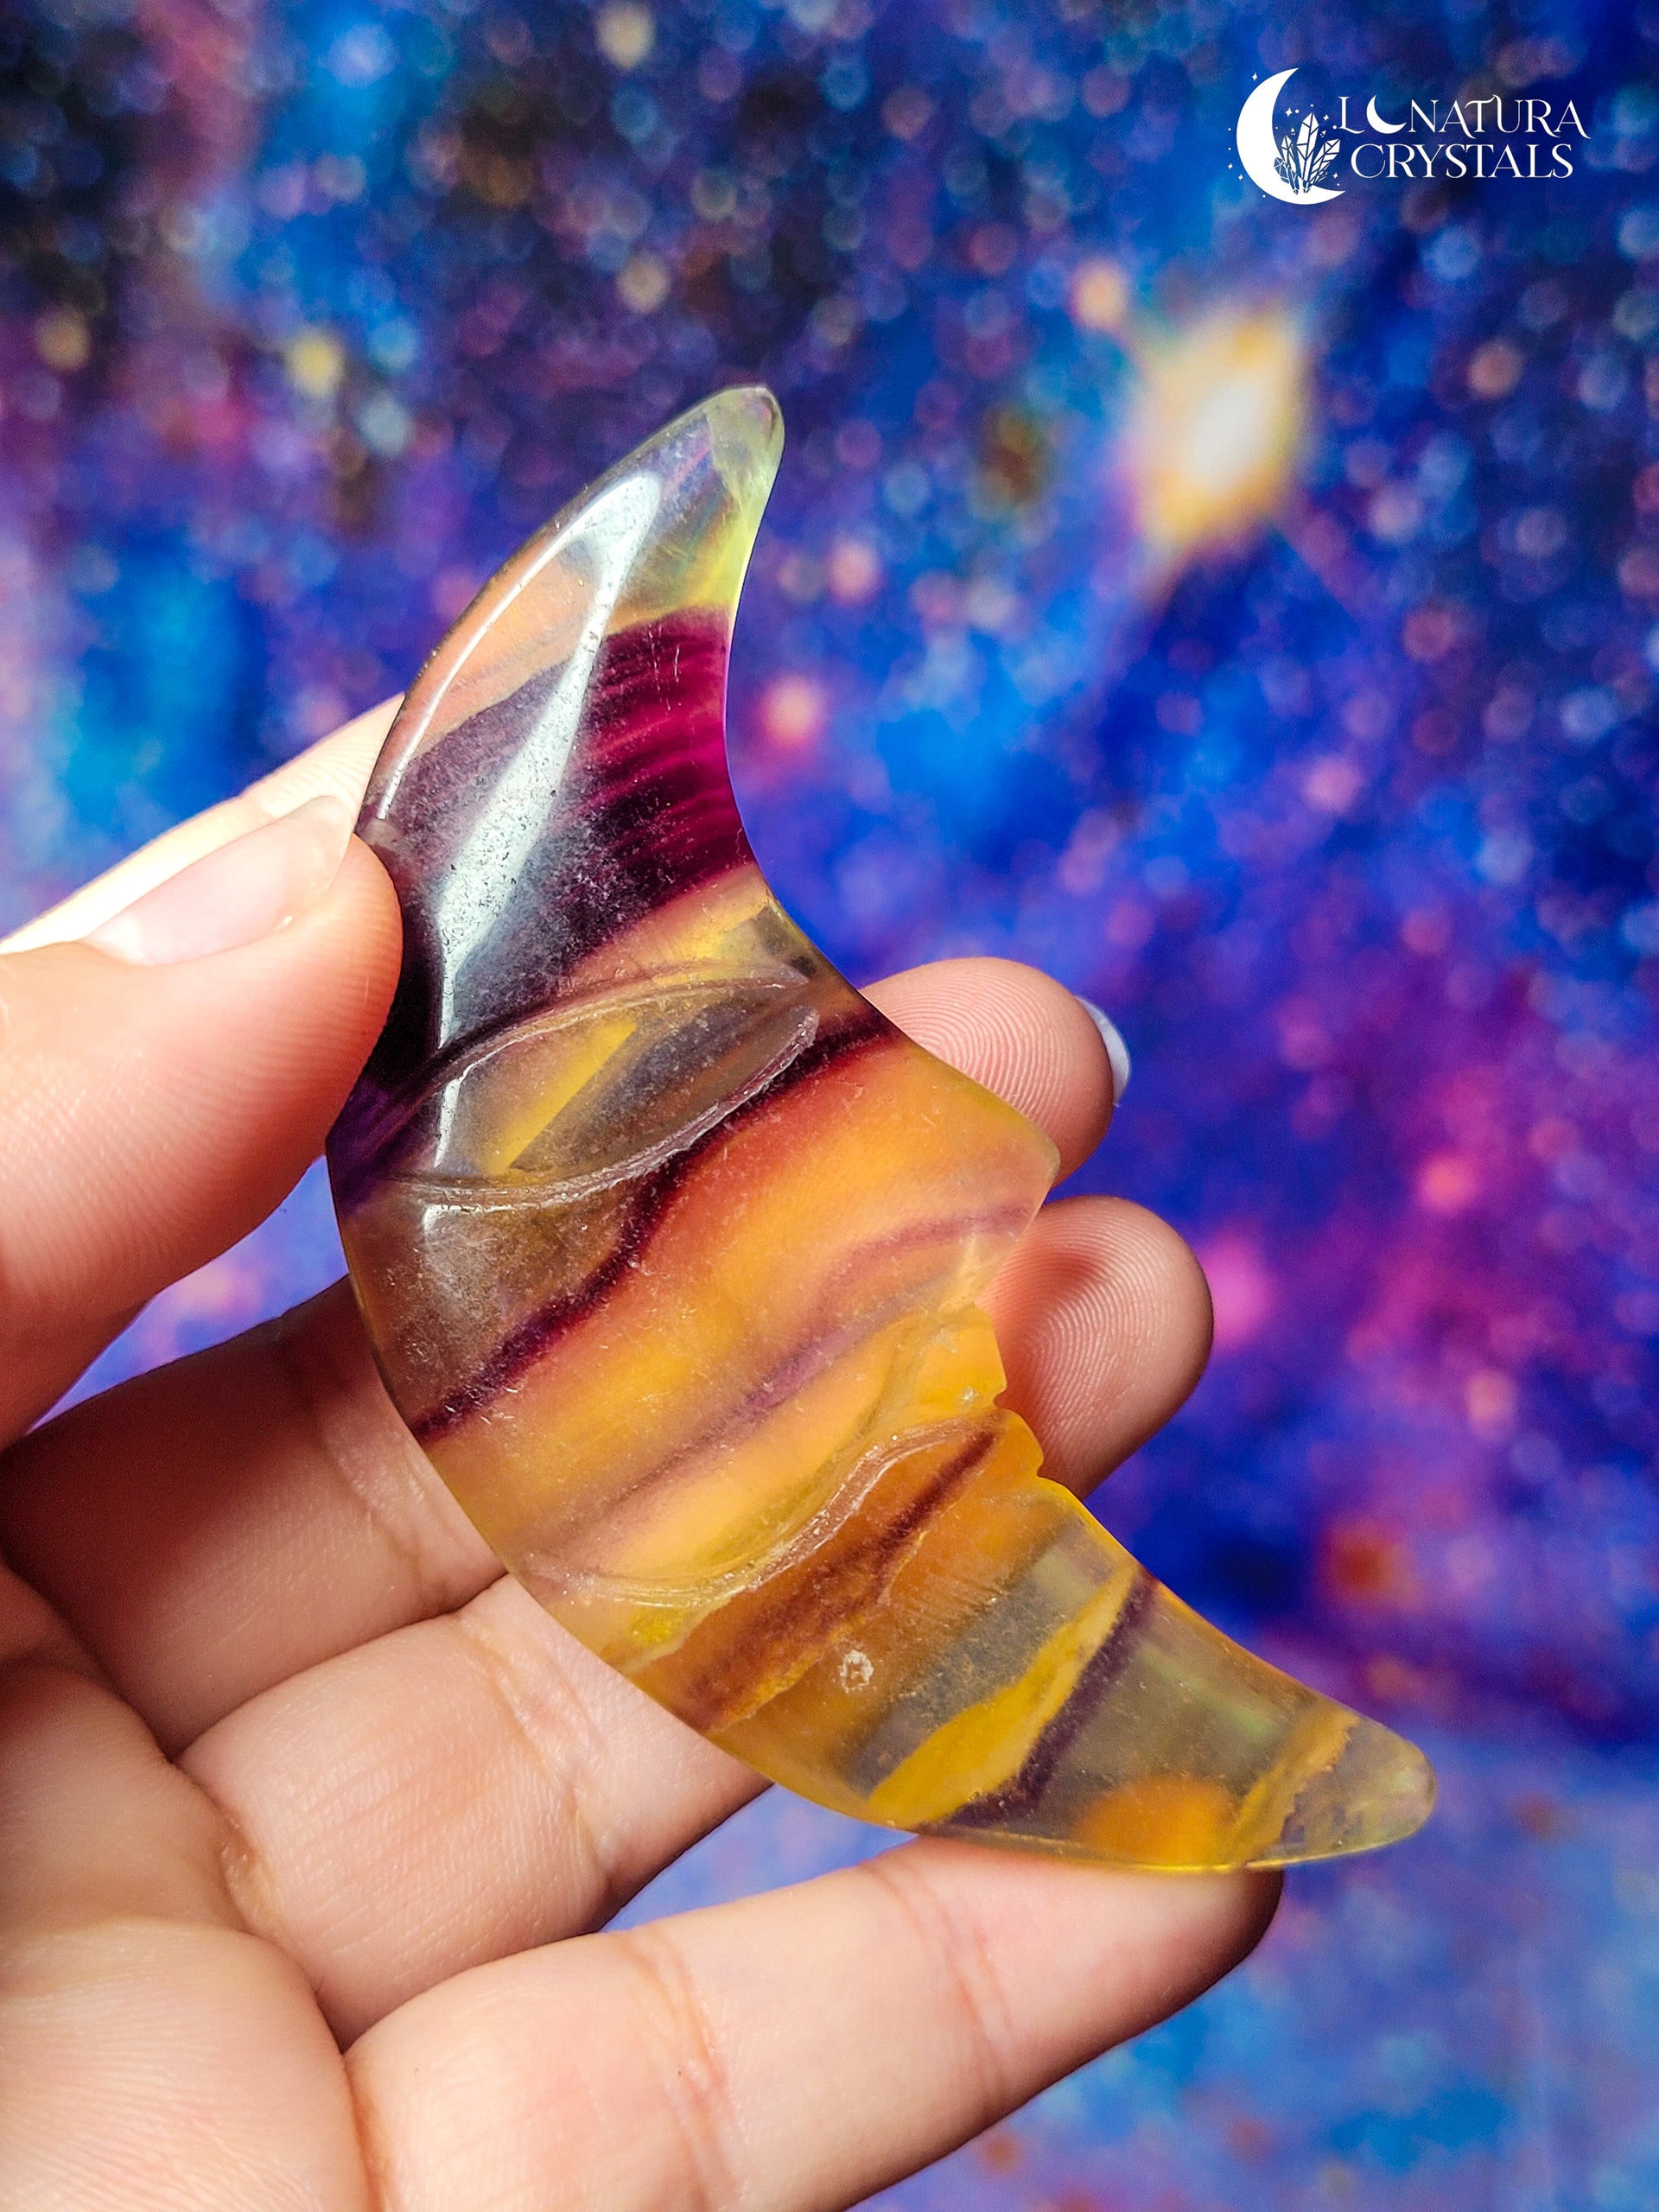 Moon Fluorite Carving [PICK YOUR FAVORITE]